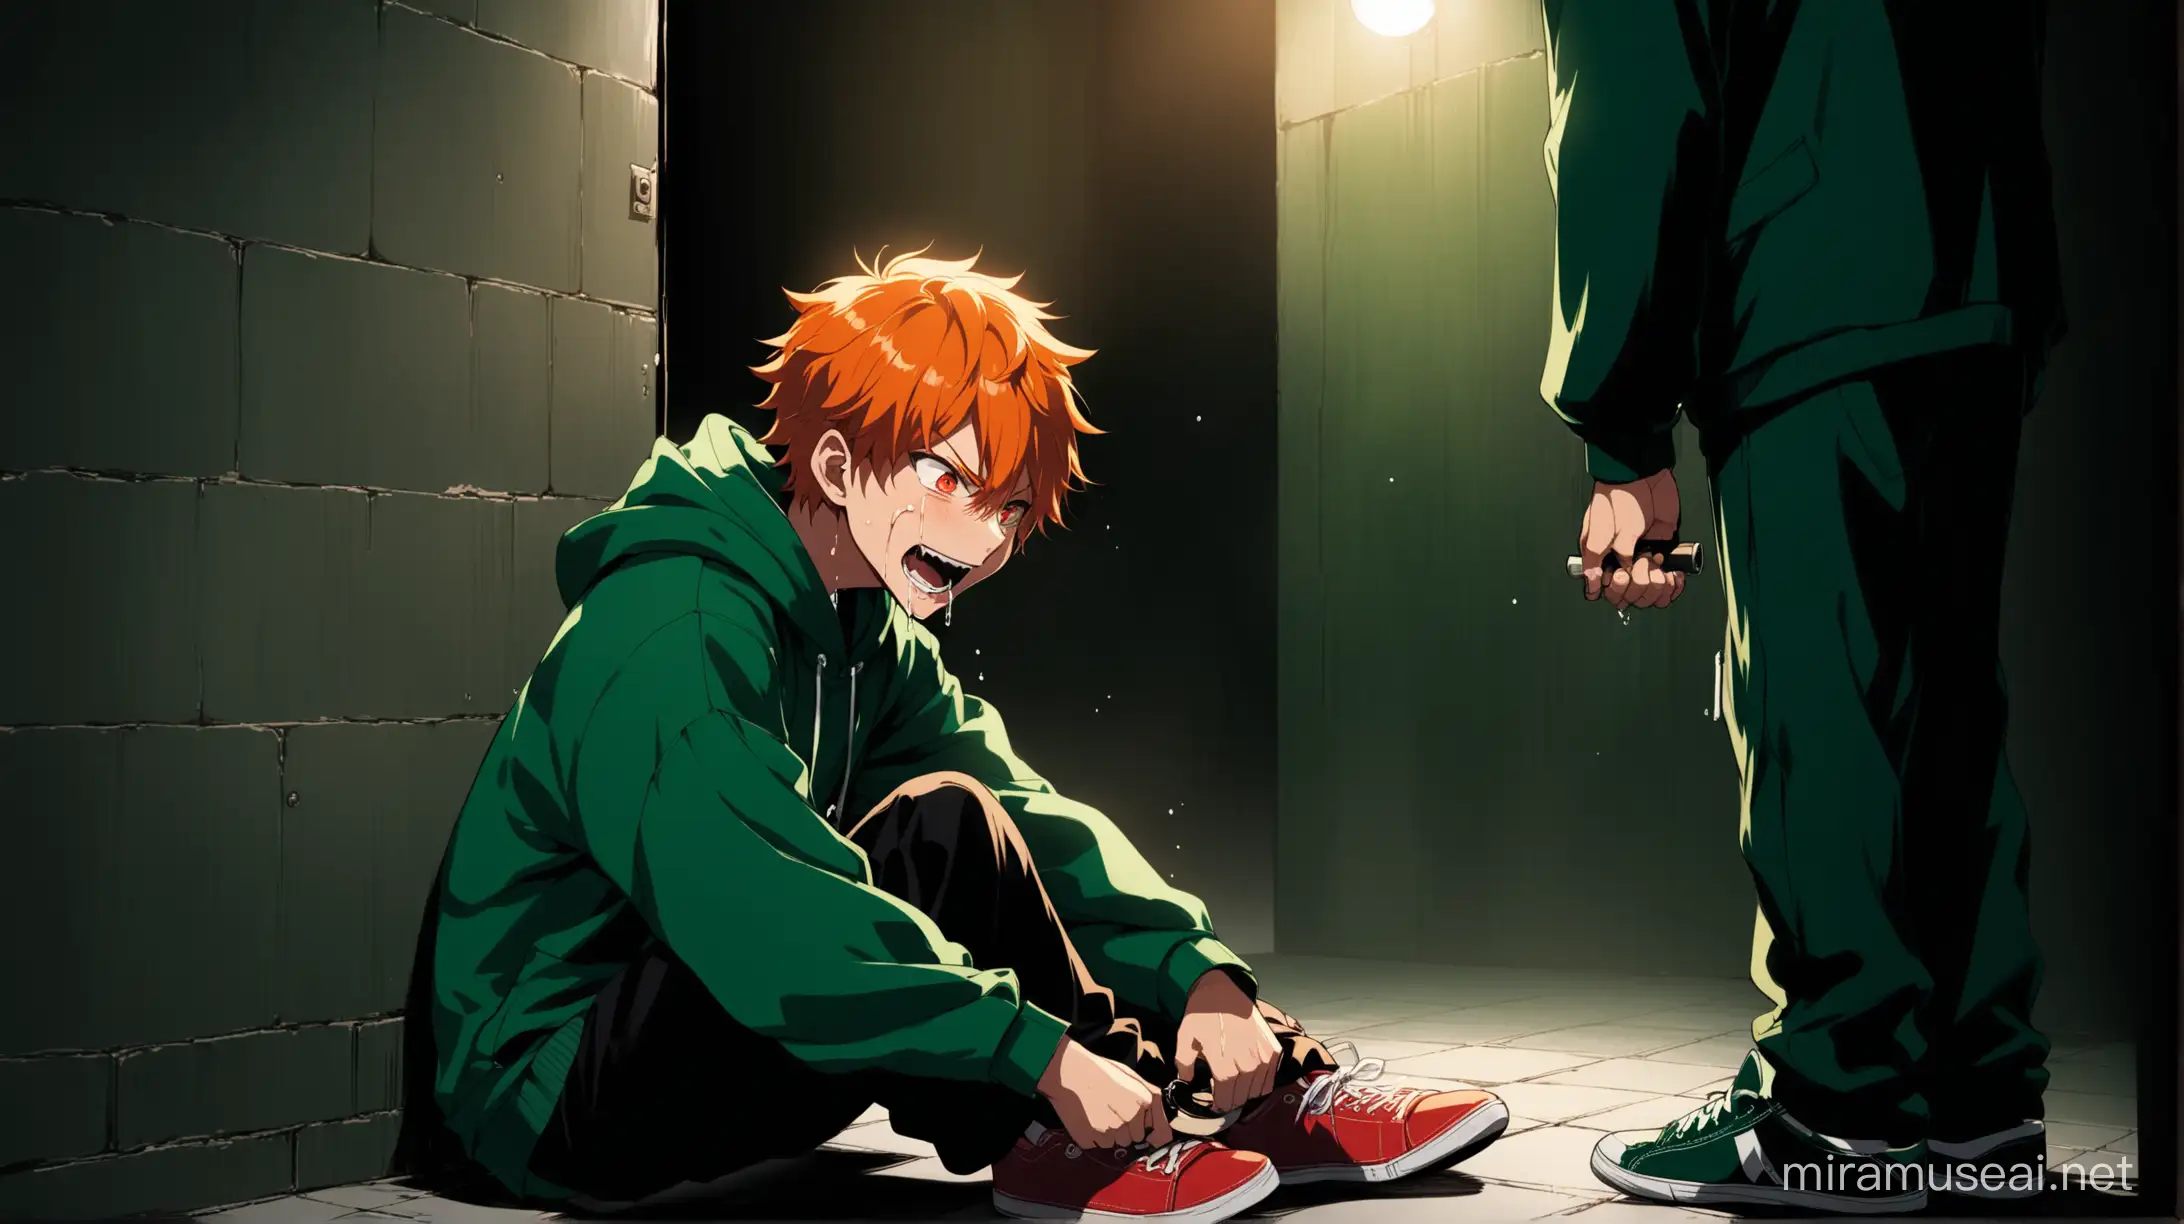 A side view  image of two anime characters in which a boy is been trapped and handcuffed by a criminal. The boy is screaming and crying and is orange headed, orange eyes, dark green hoodie, tall, handsome and is sitting on the floor of a underground secret room. The criminal is dark green headed, evil, evil smile, red bright eyes, badass, tall, wearing dark green hoodie with red inner shirt collars, green sneakers. The criminal is  touching the boys chin with a baseball bat and bending to talk with the boy. The boy is sitting on the floor handcuffed, crying, staring at the eyes of the criminal. The boy and the criminal are sitting in an underground secret room with dark green contrasts and vibe. The criminal is evil smiling and harrassing the boy with a baseball bat. The boy is crying.